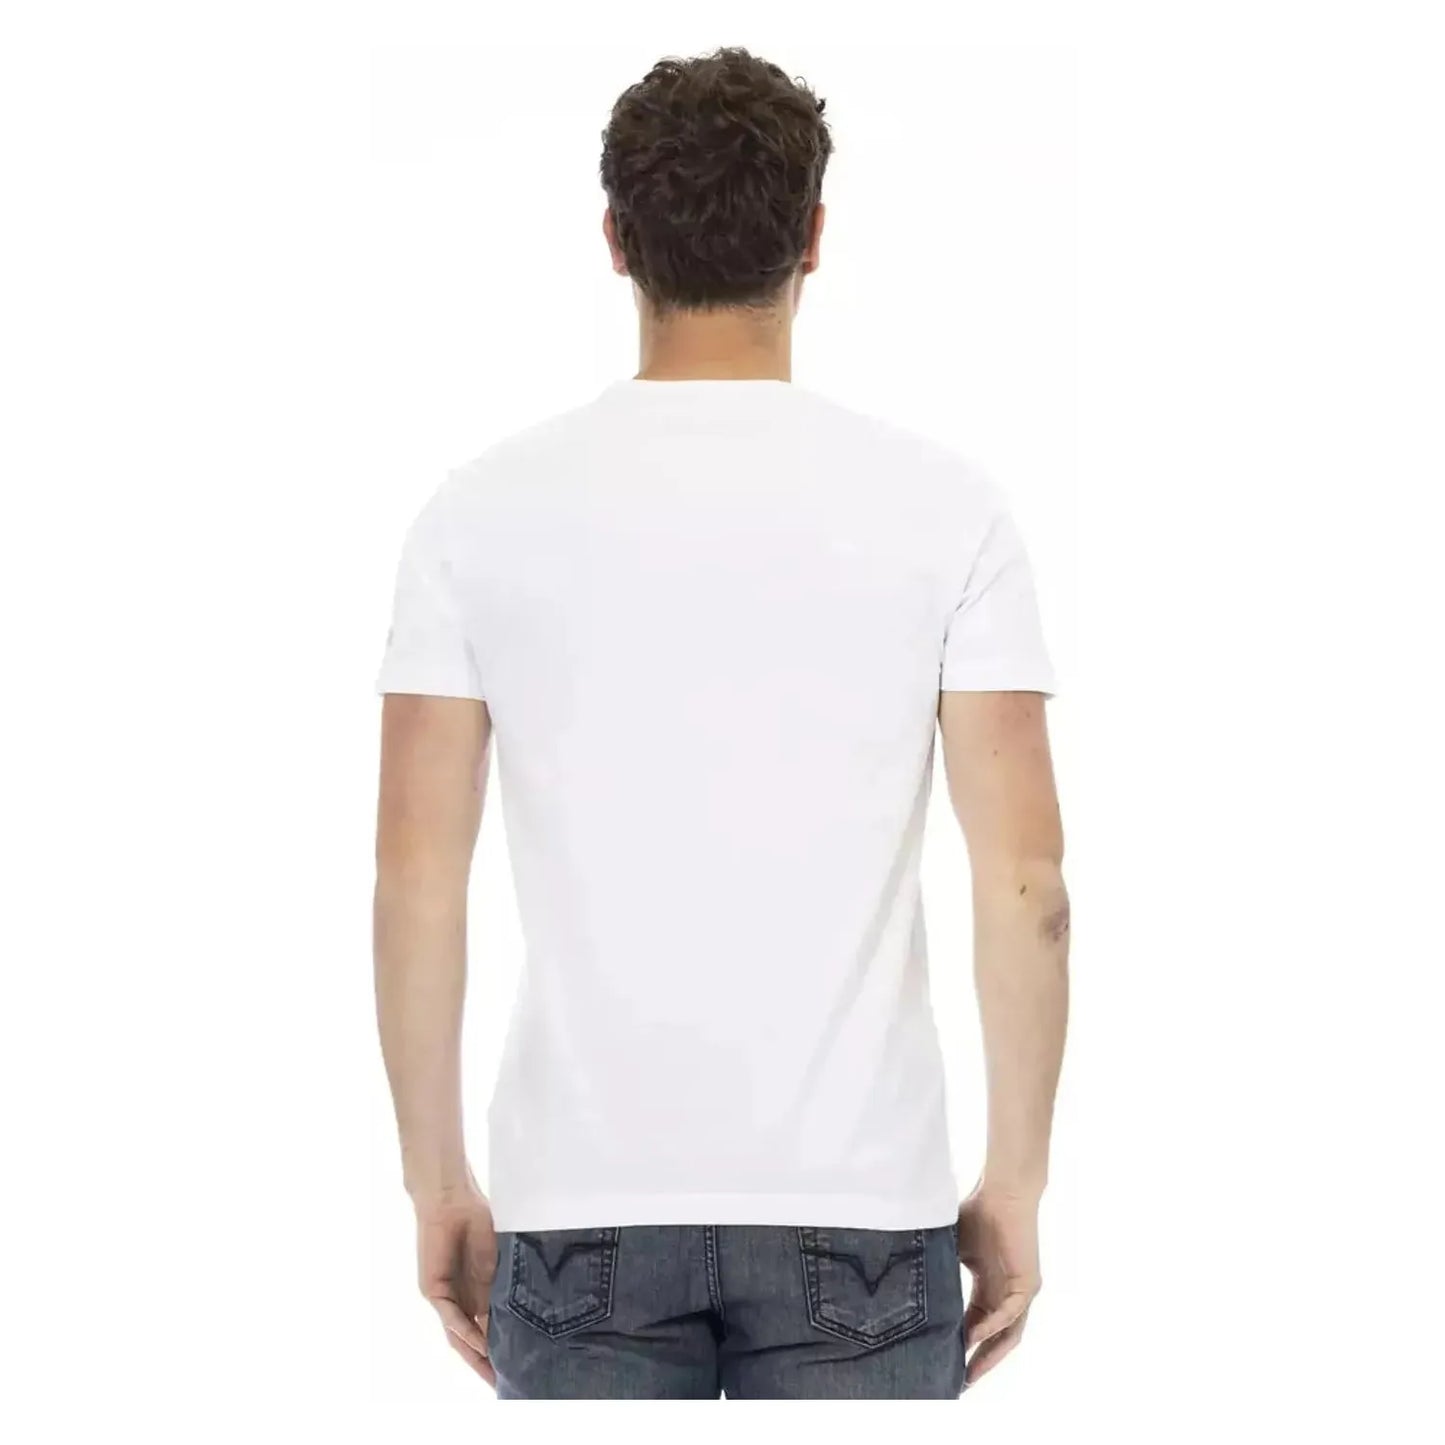 Trussardi Action Sleek White Cotton Blend Tee with Graphic Front white-cotton-t-shirt-125